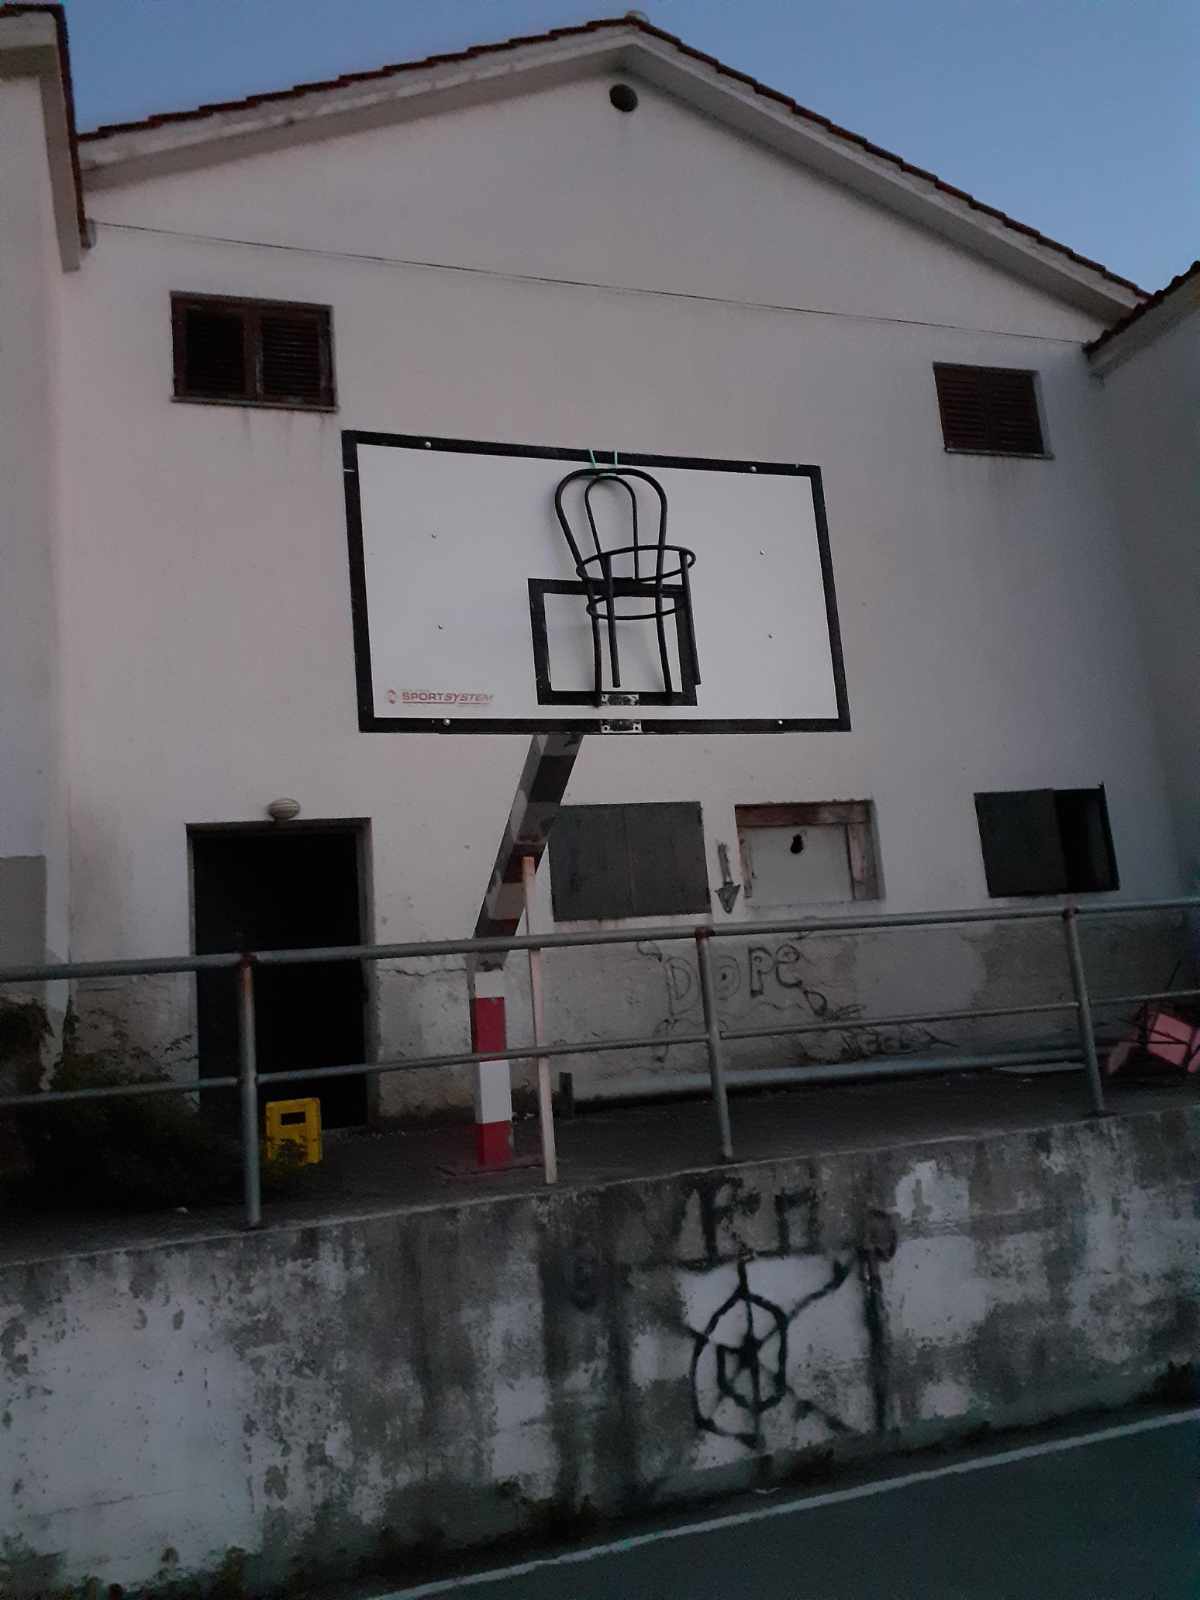 Found this on my vacation in Croatia